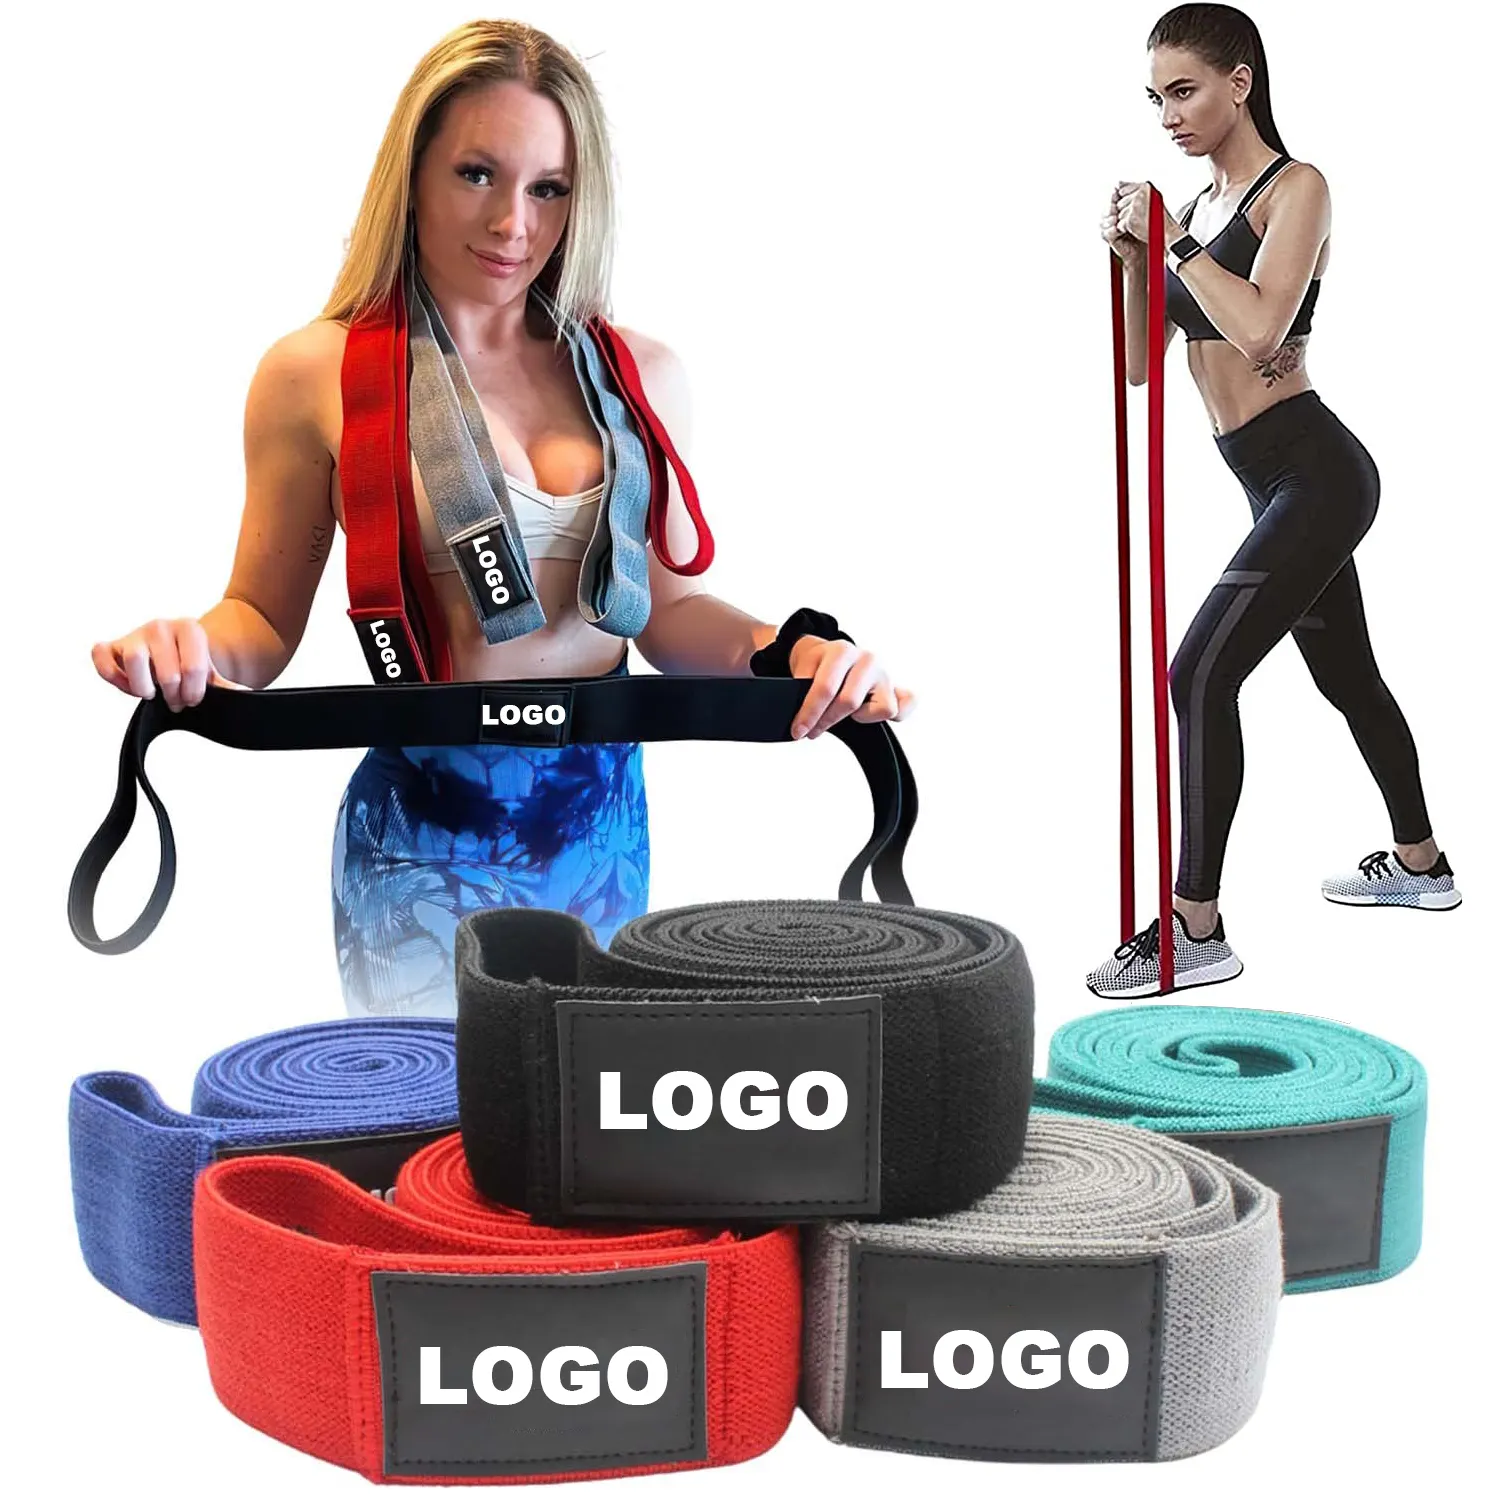 Fitness Exercise Home Gym Training Muscle Building Portable Loop Bands Stretch Resistance Bands Elastic Workout Bands